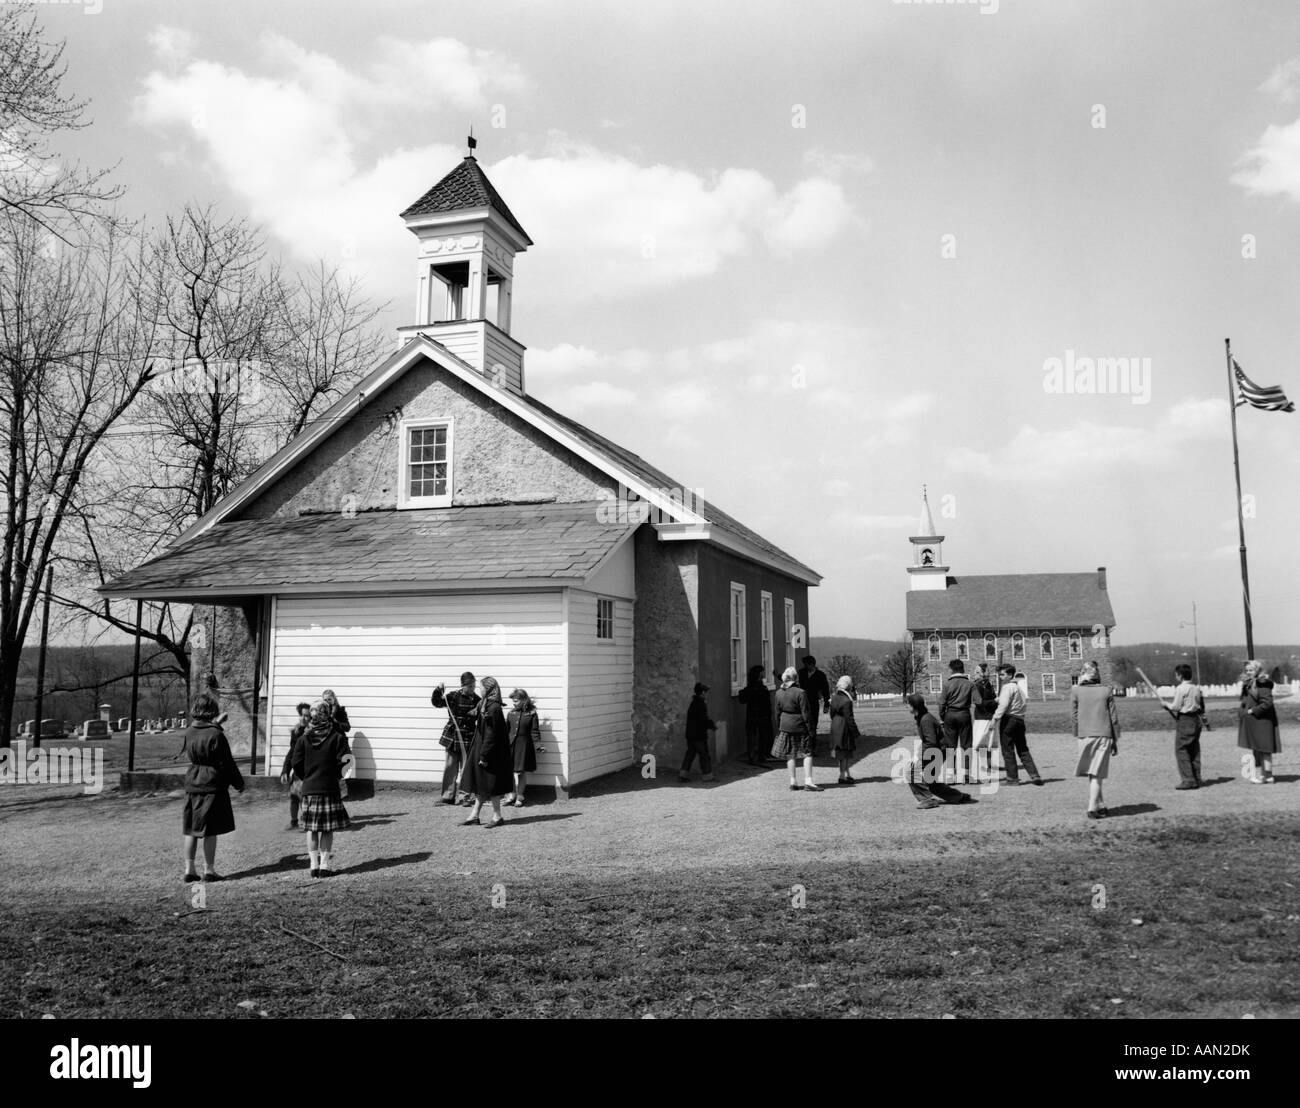 1950s GRADE SCHOOL CHILDREN AT RECESS OUTSIDE OF RURAL ONE-ROOM SCHOOLHOUSE Stock Photo